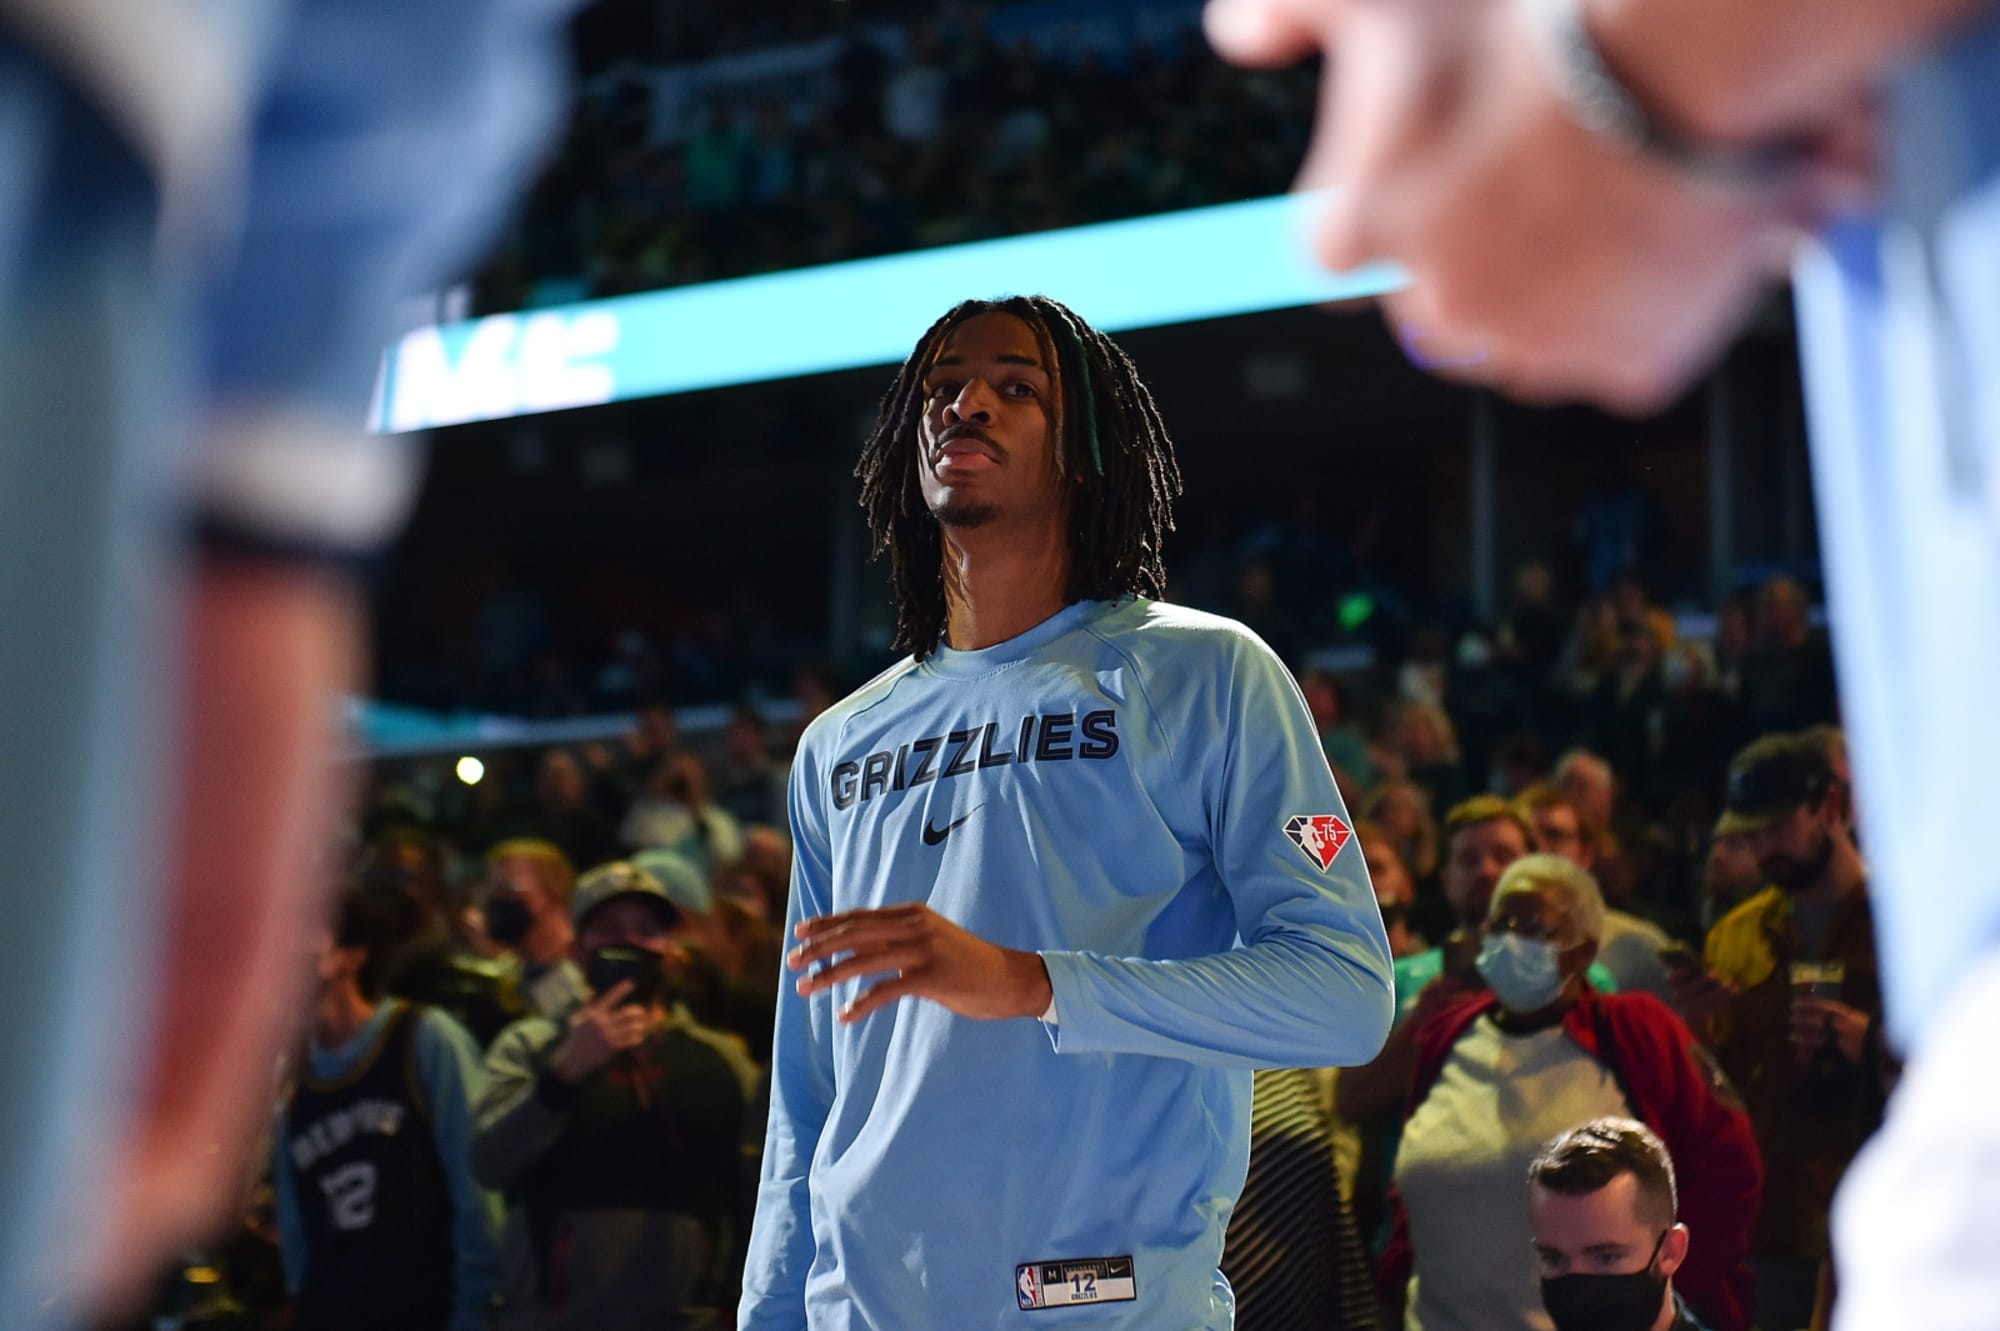 Grizzlies star Ja Morant shows ultimate love for Kobe Bryant with